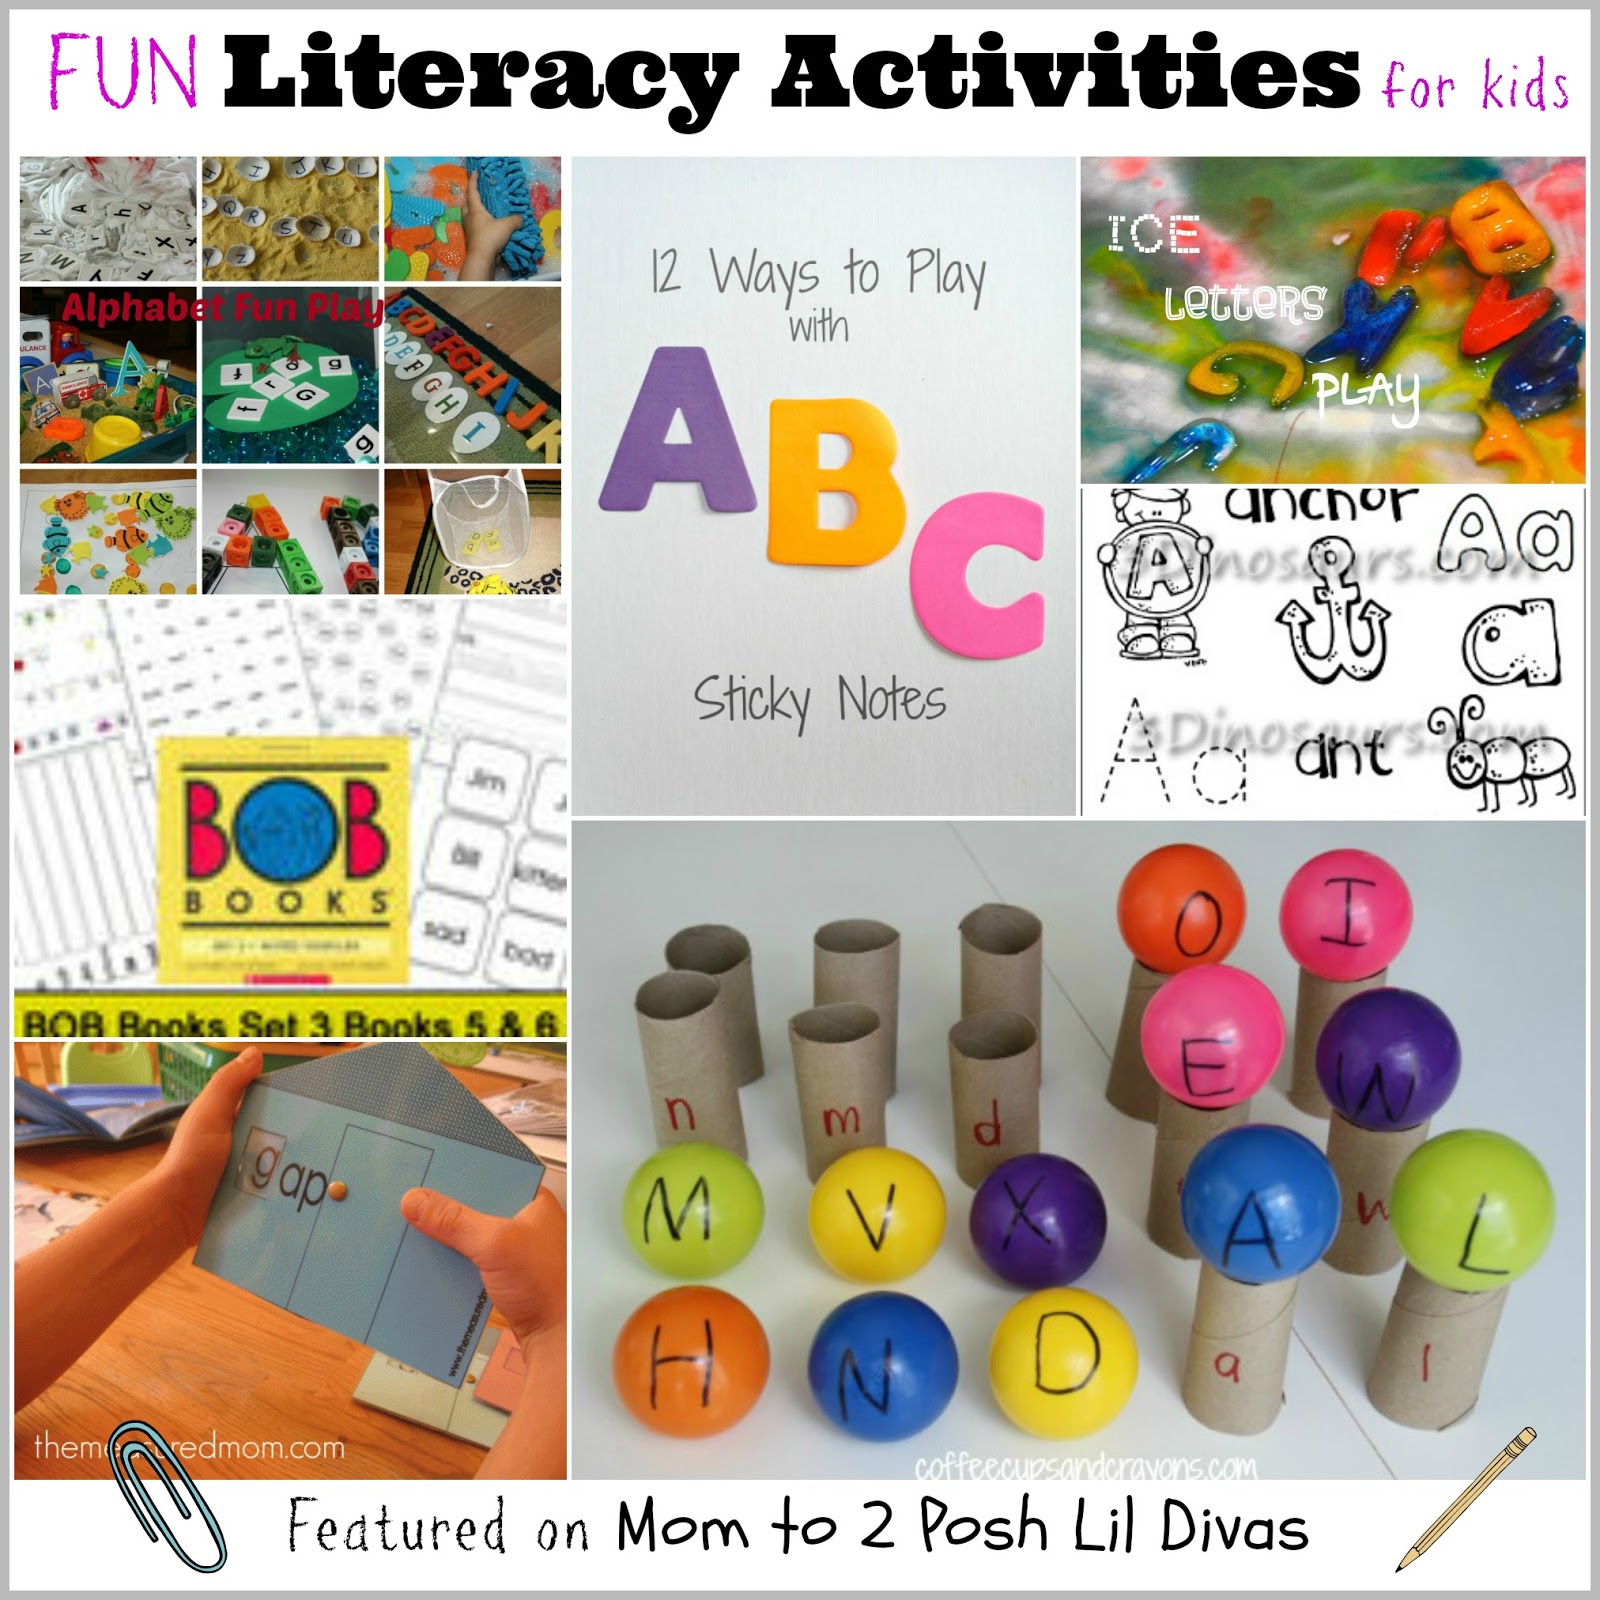 Activities to Play with ABC Sticky Notes